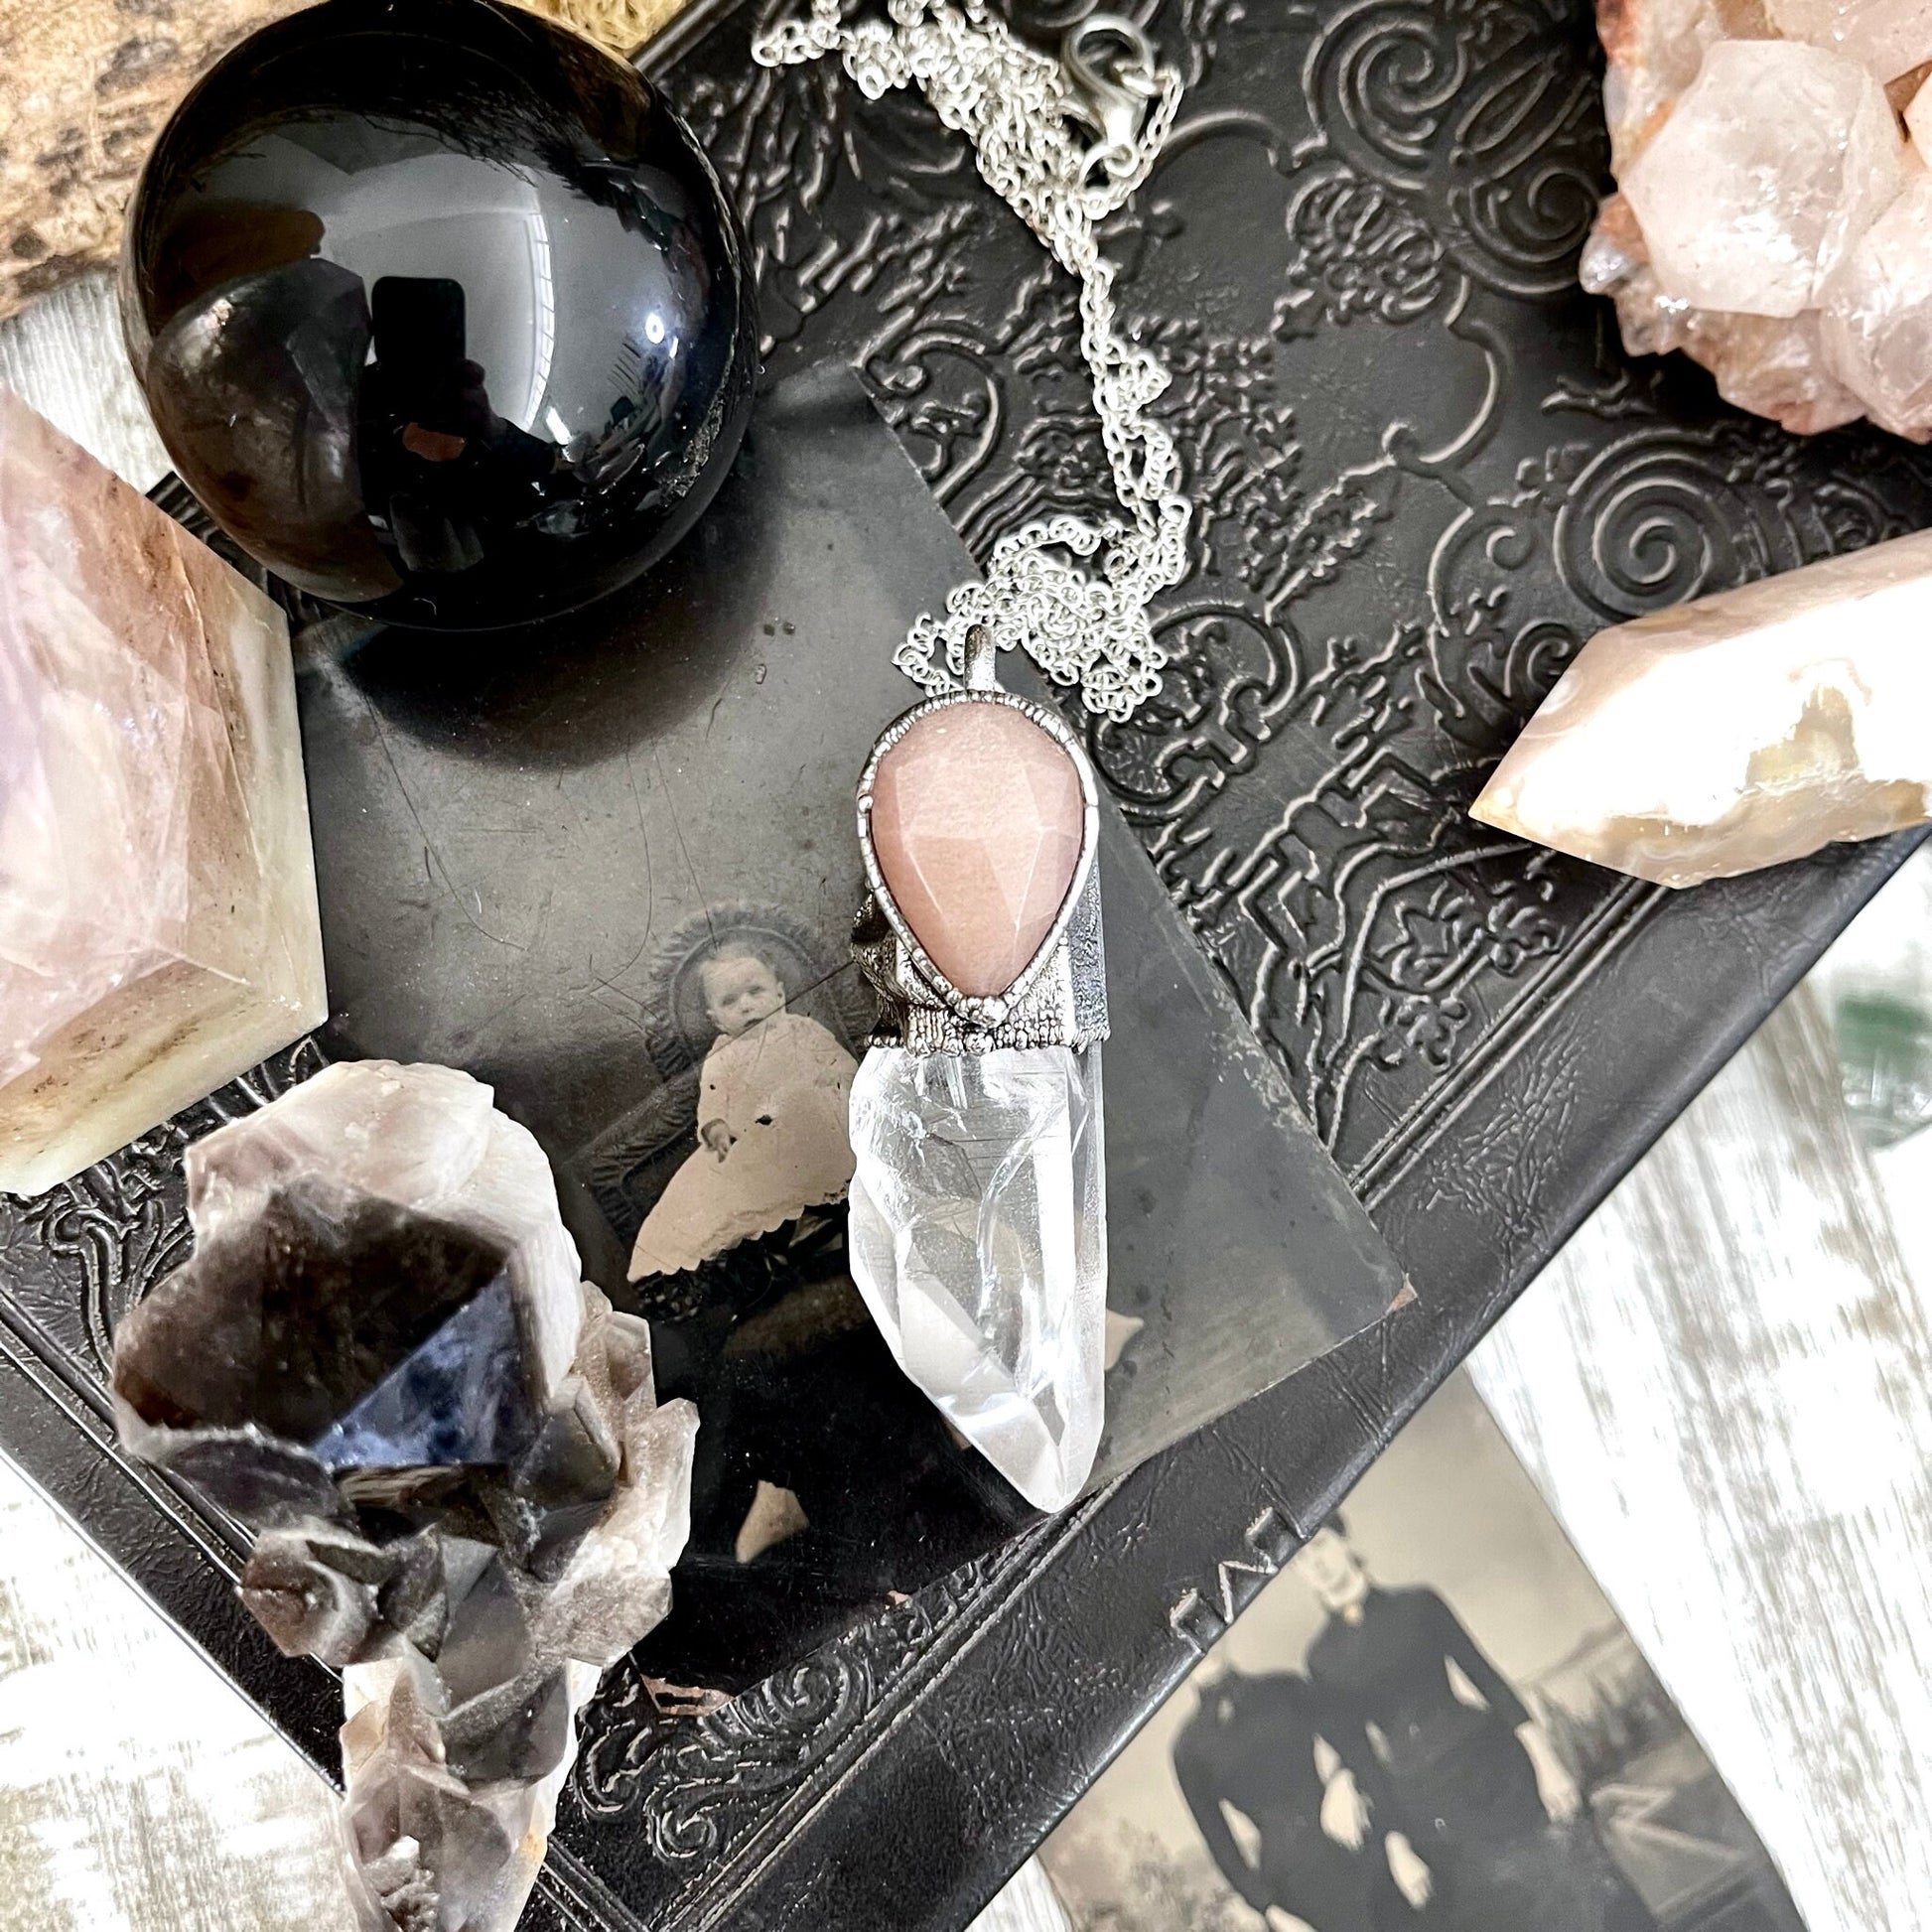 Raw Clear Quartz & Peach Moonstone Crystal Necklace in Fine Silver / Foxlark Collection - One of a Kind / Pink Stone Jewelry